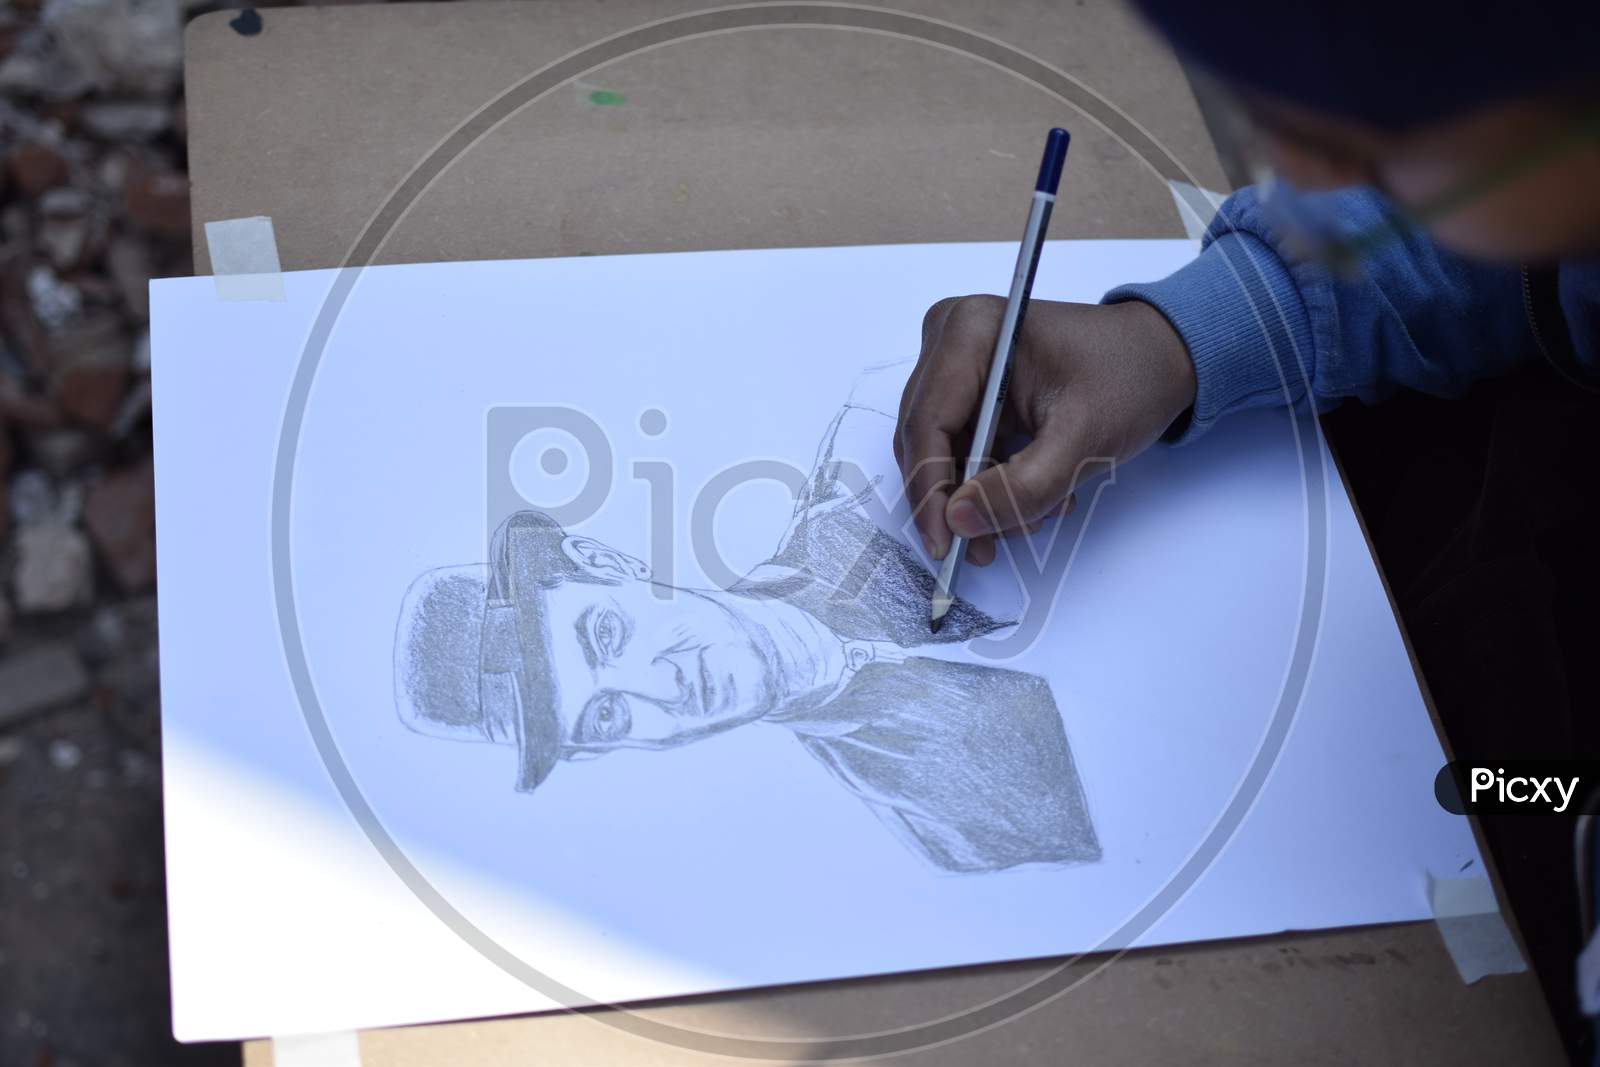 A School student drawing a man's portrait wearing a hat